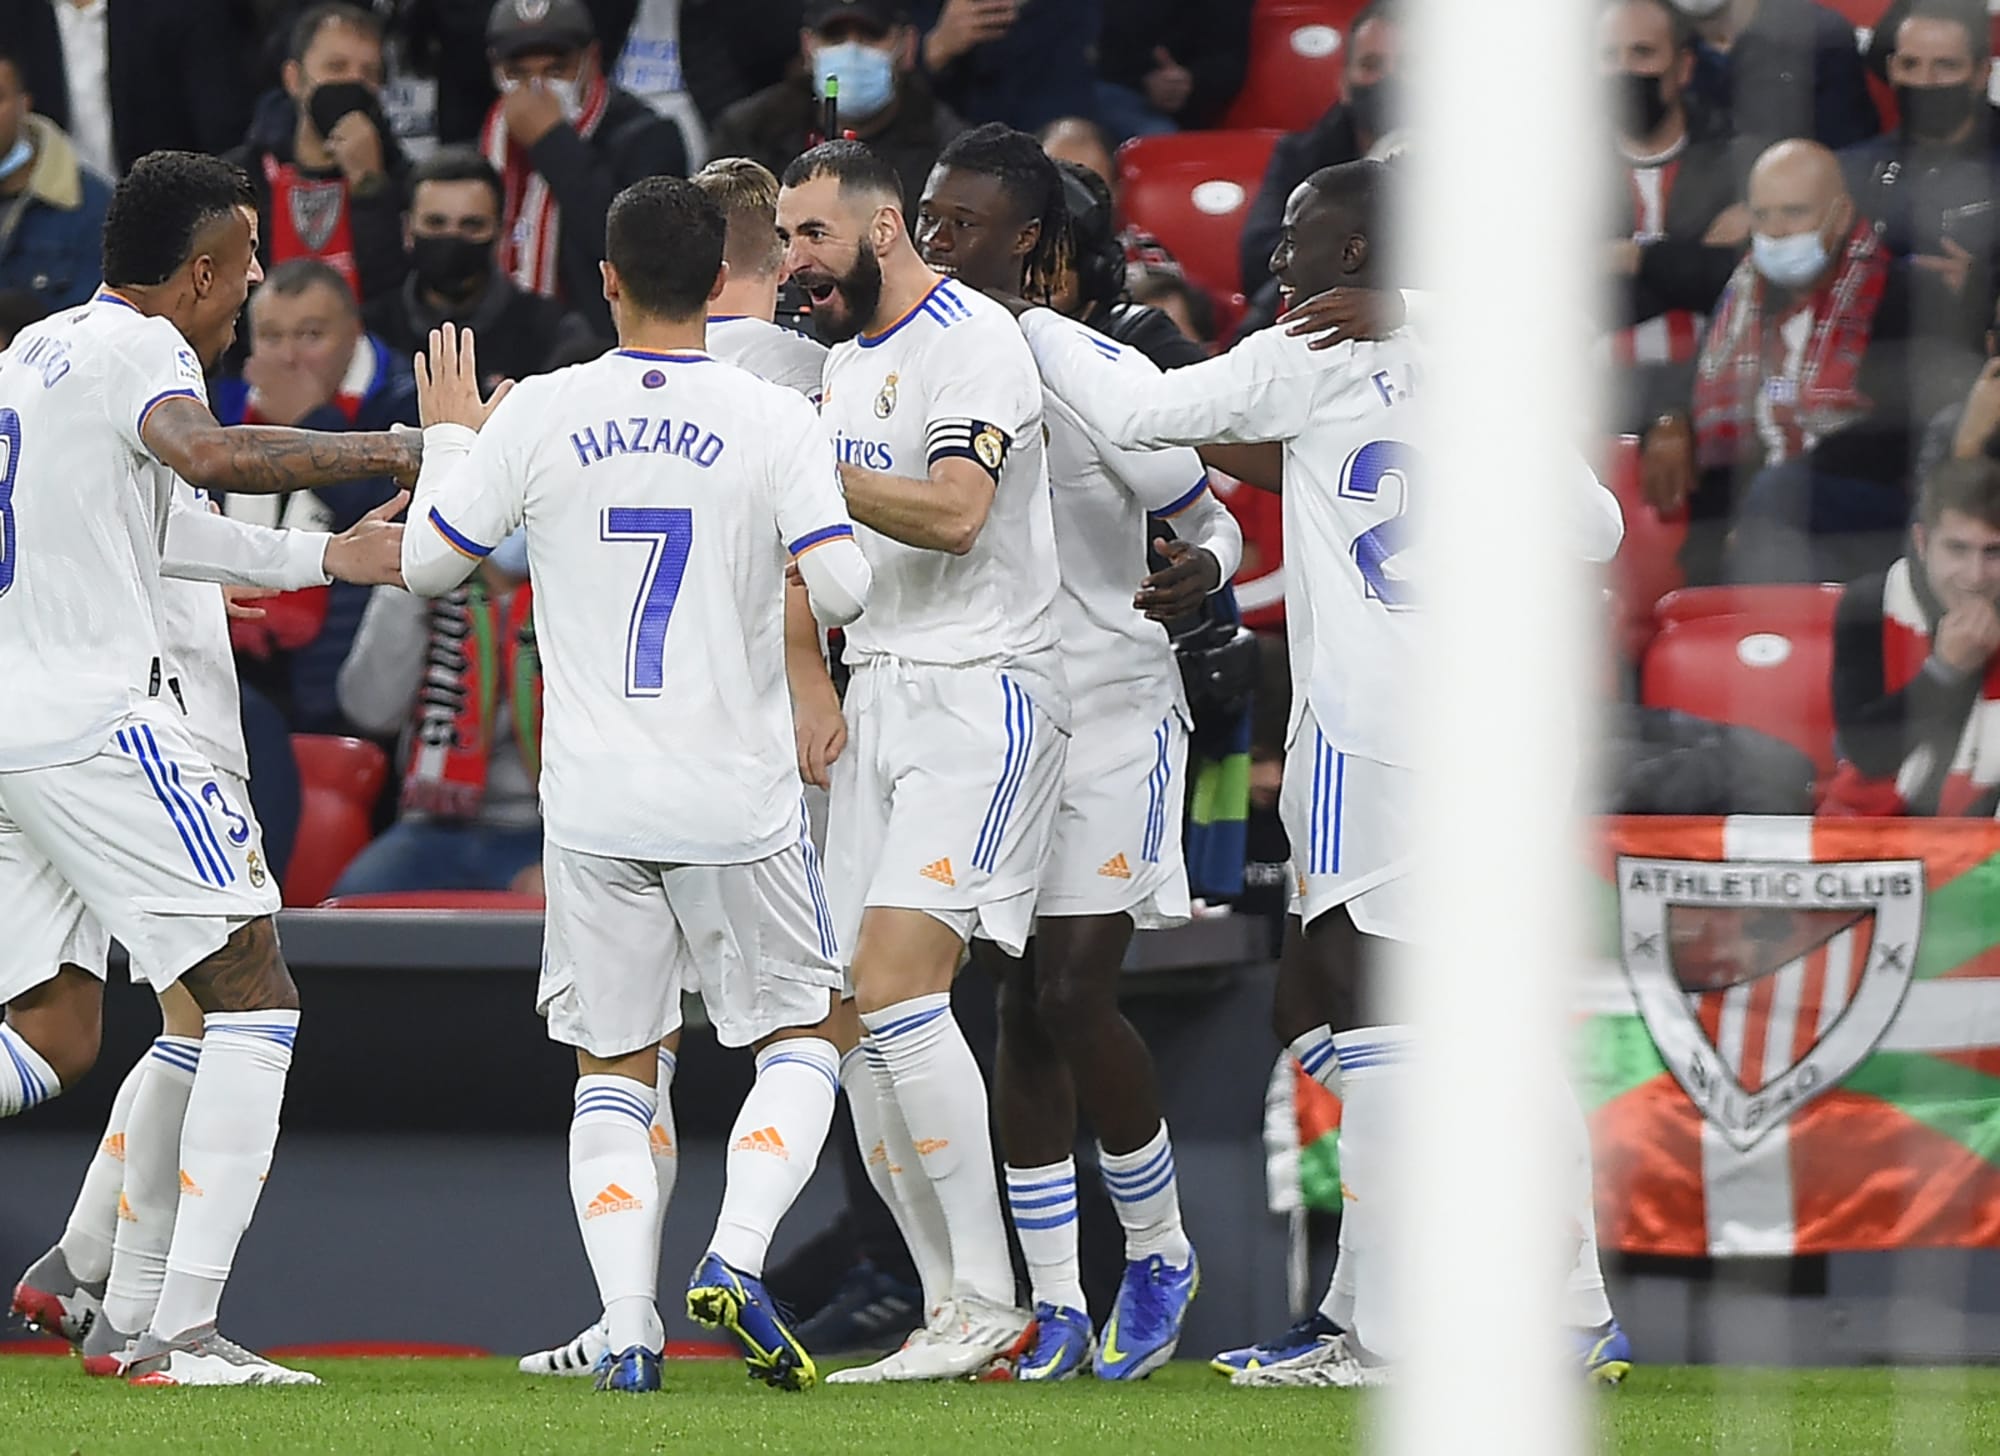 Karim Benzema scored one of the best curlers you'll see vs. Athletic Bilbao